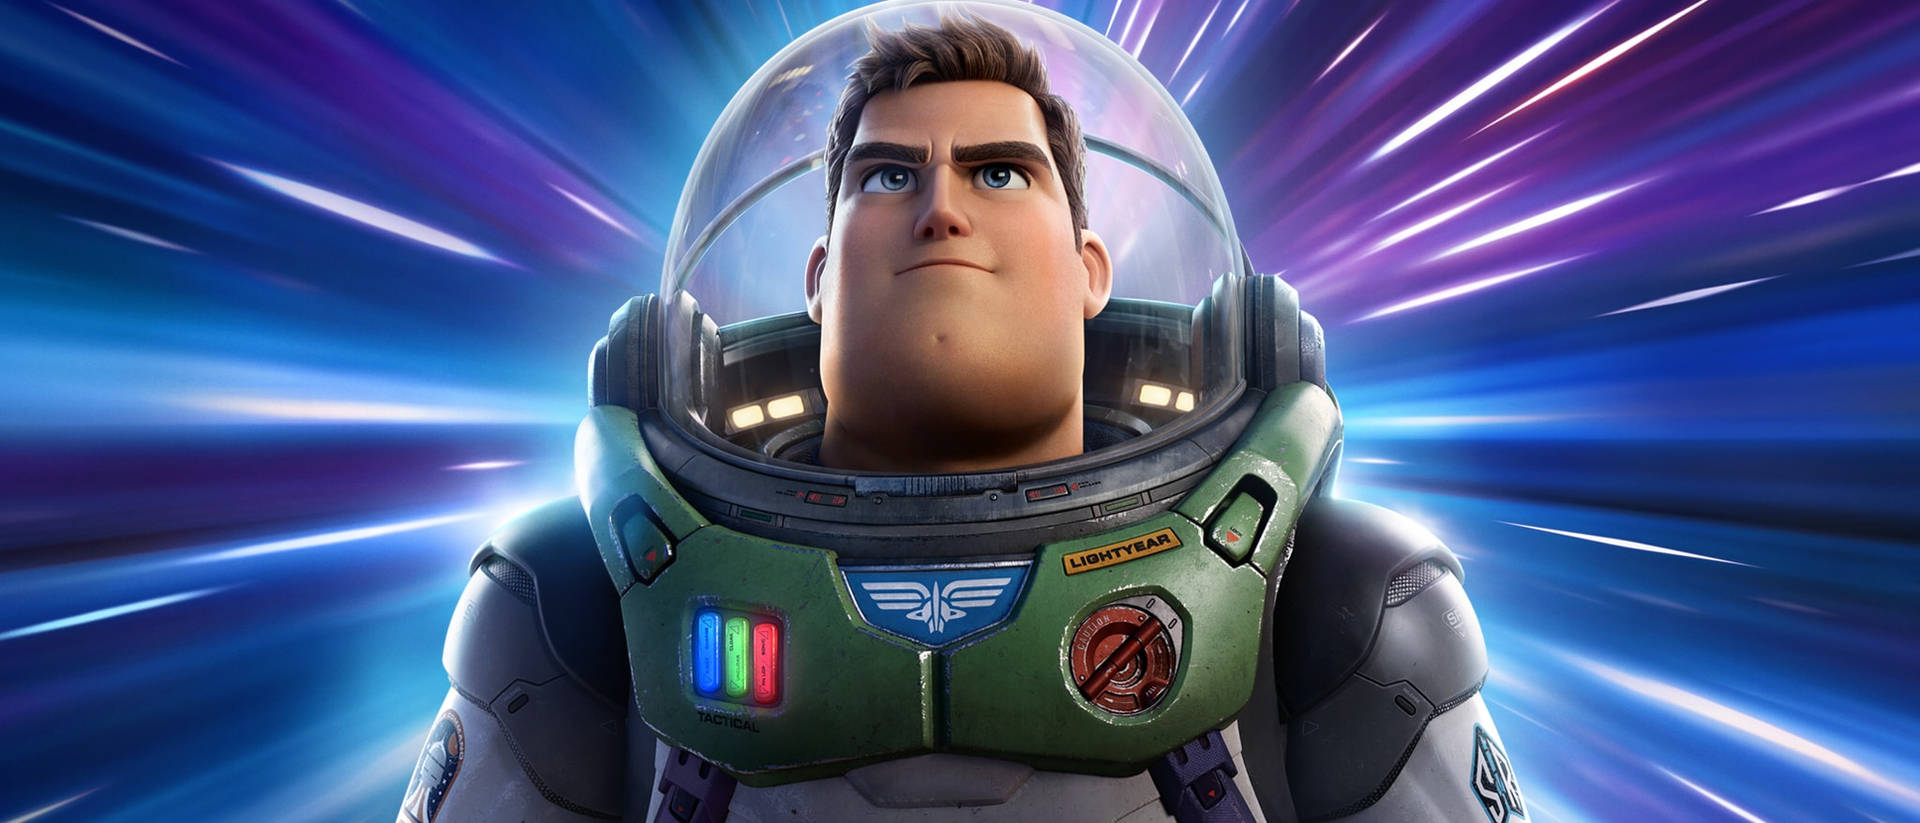 Buzz Lightyear With Beams Of Light Wallpaper